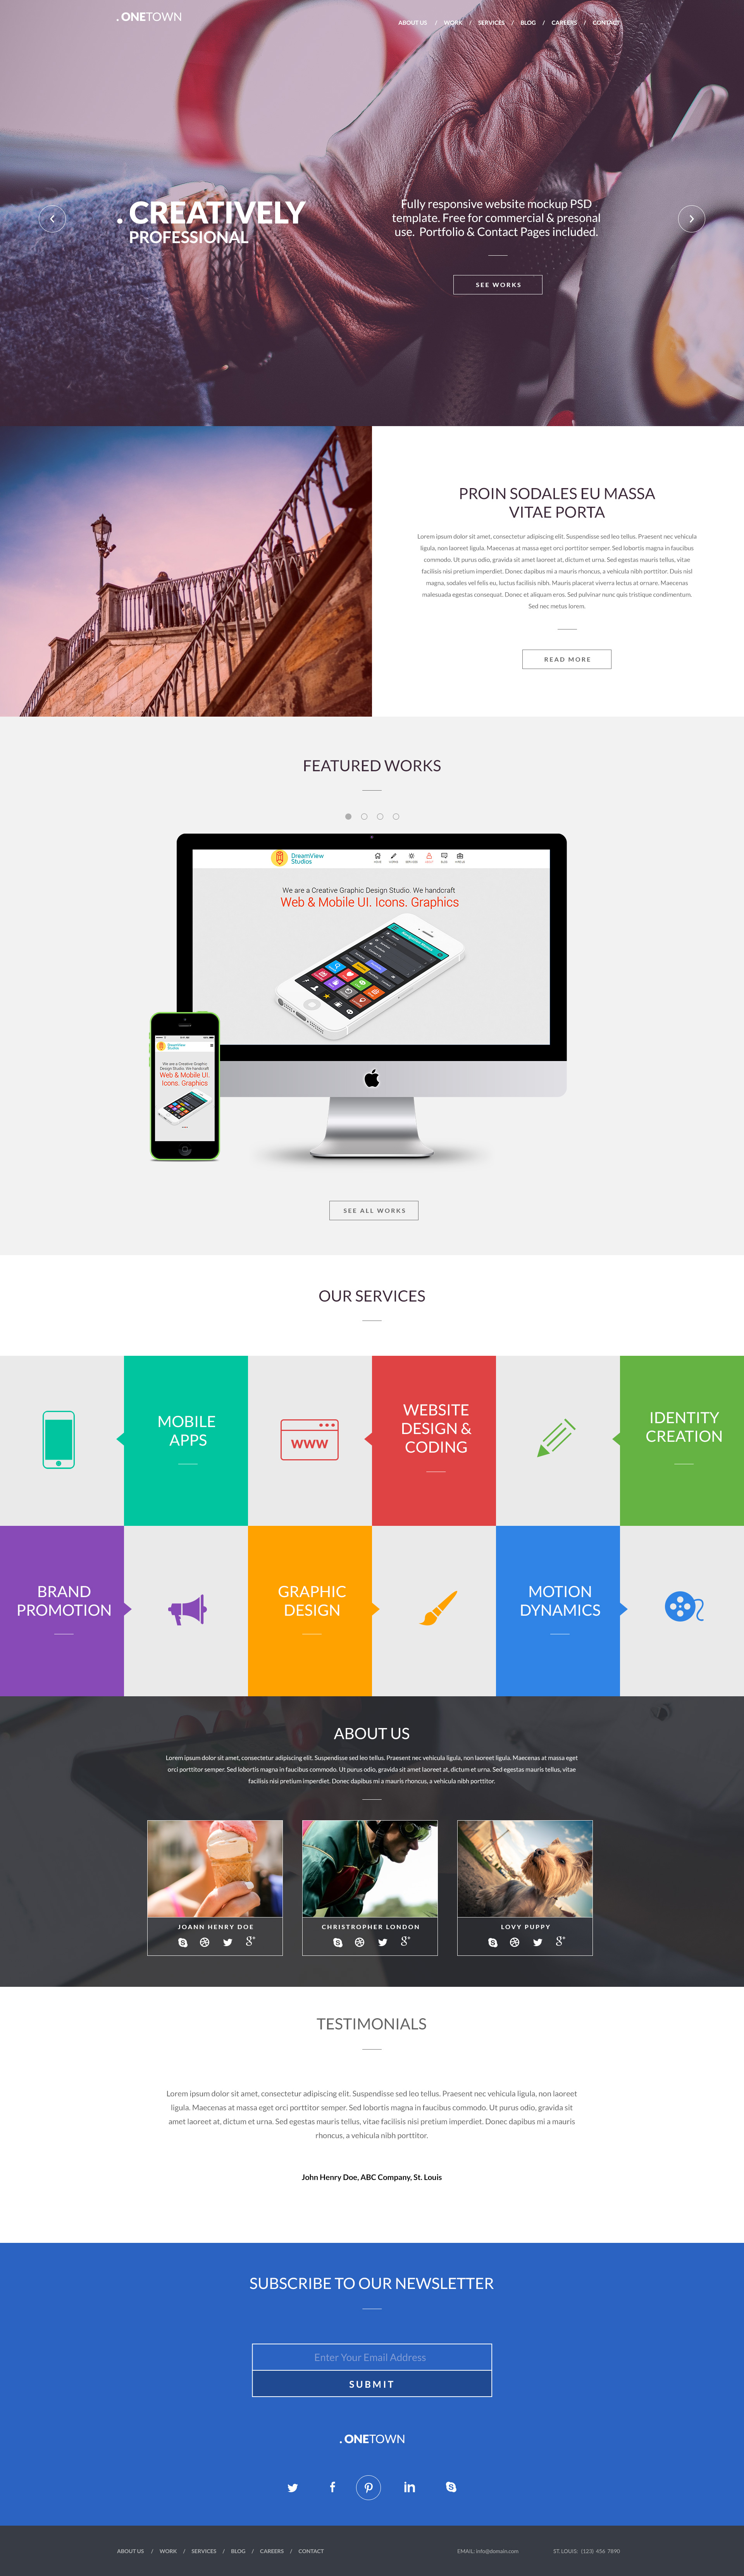 Free Responsive Website PSD Templates GraphicsFuel